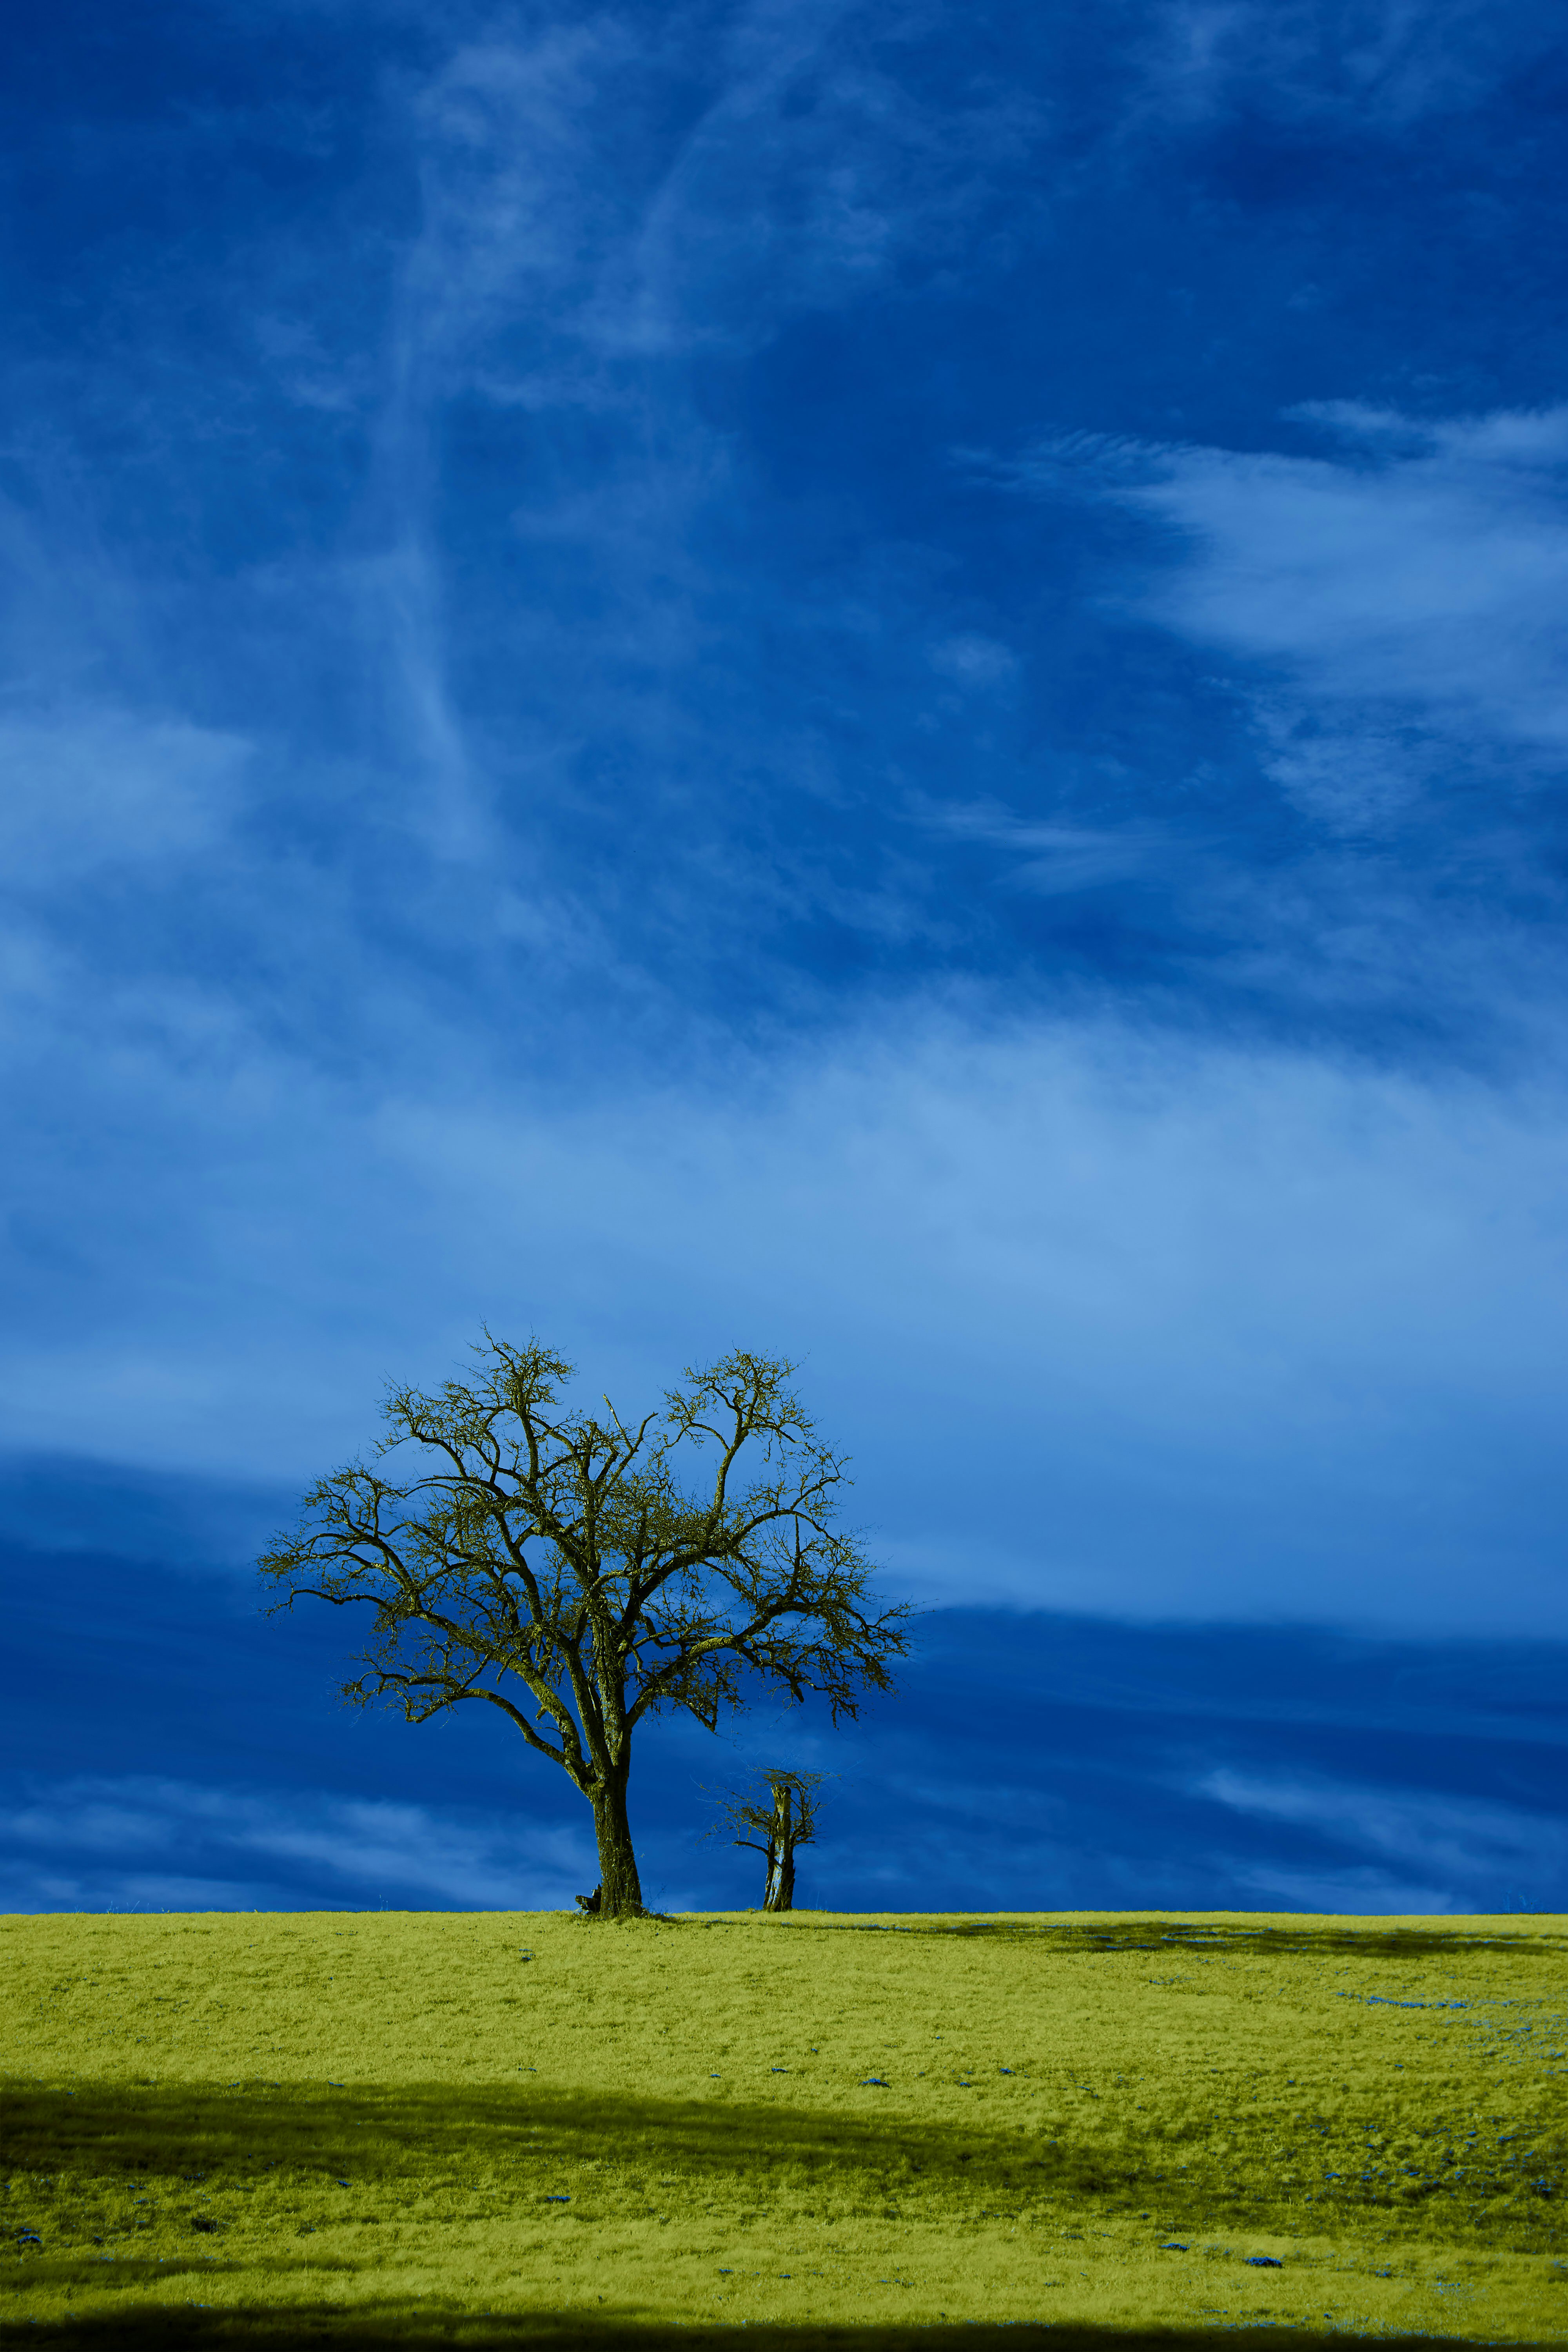 leafless tree on green grass field under white clouds and blue sky during daytime